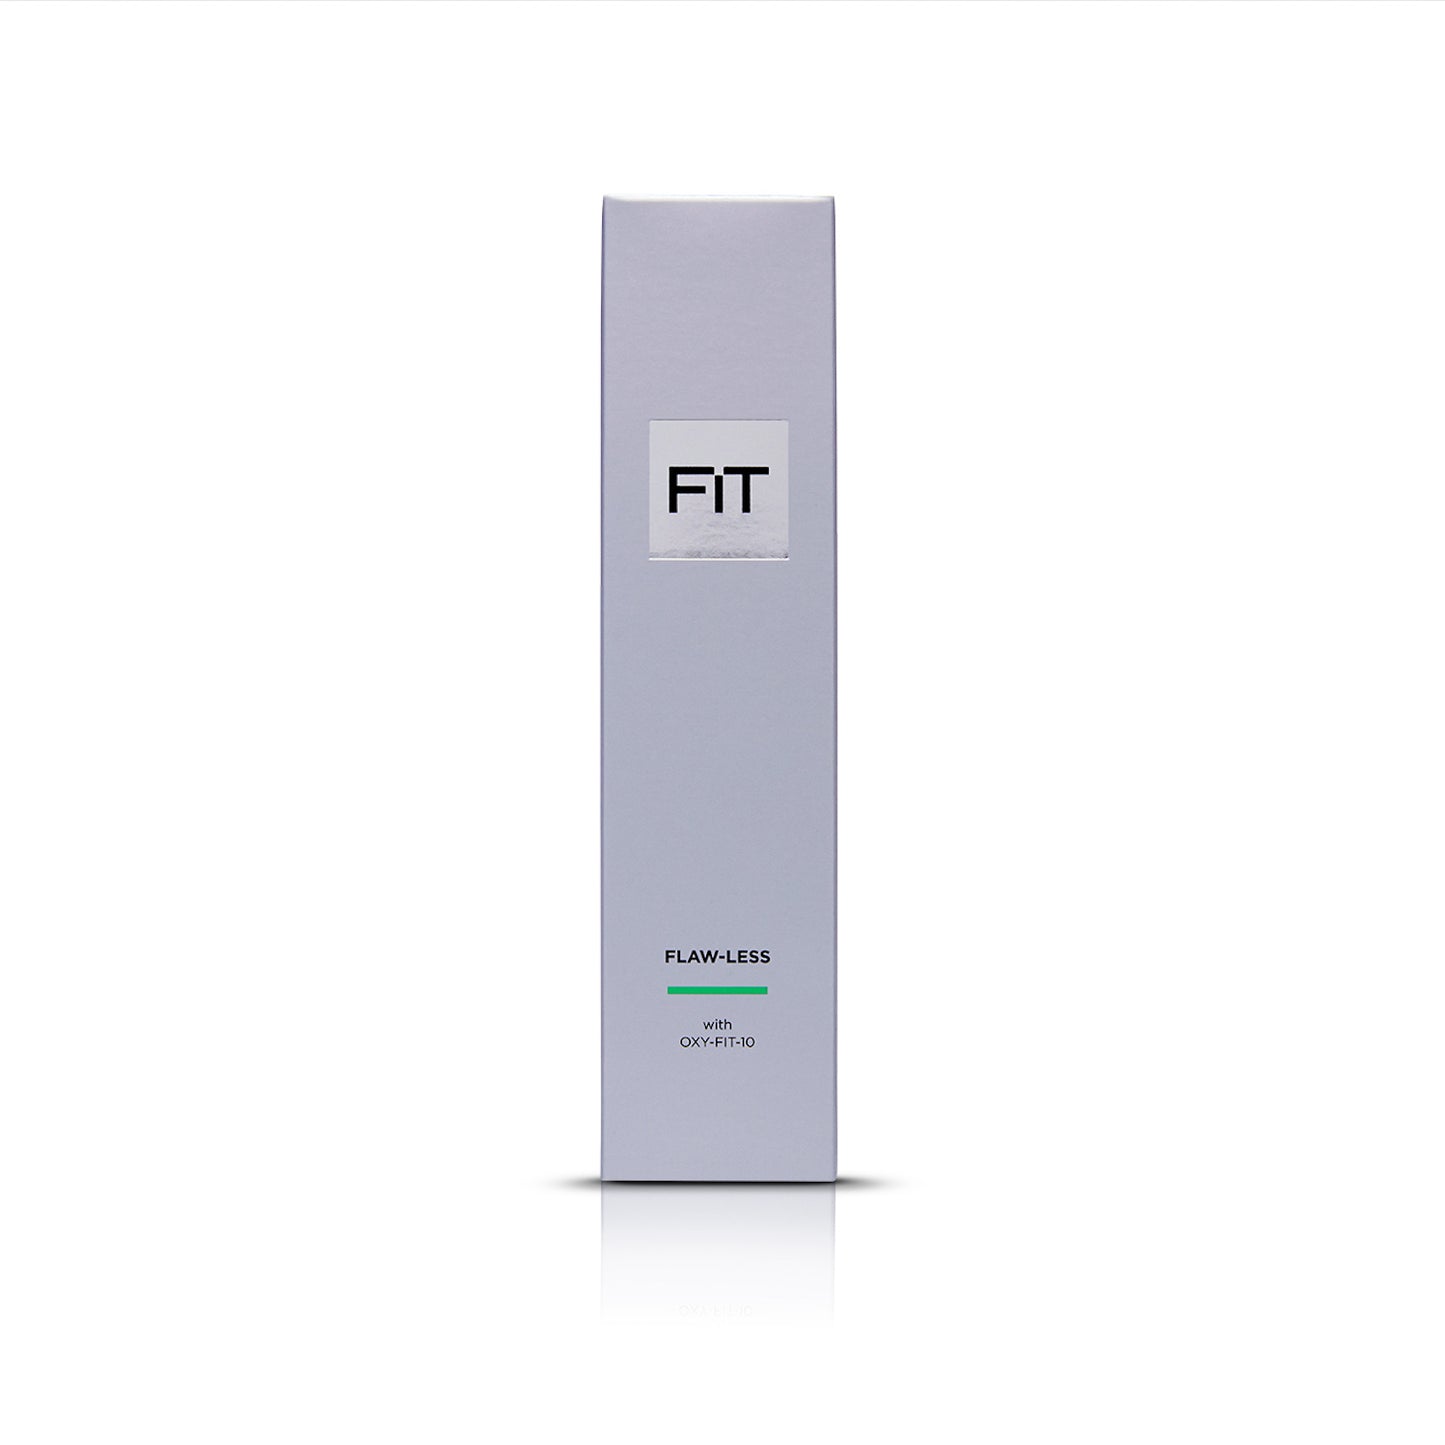 FIT Skincare Flaw-Less, 100ml